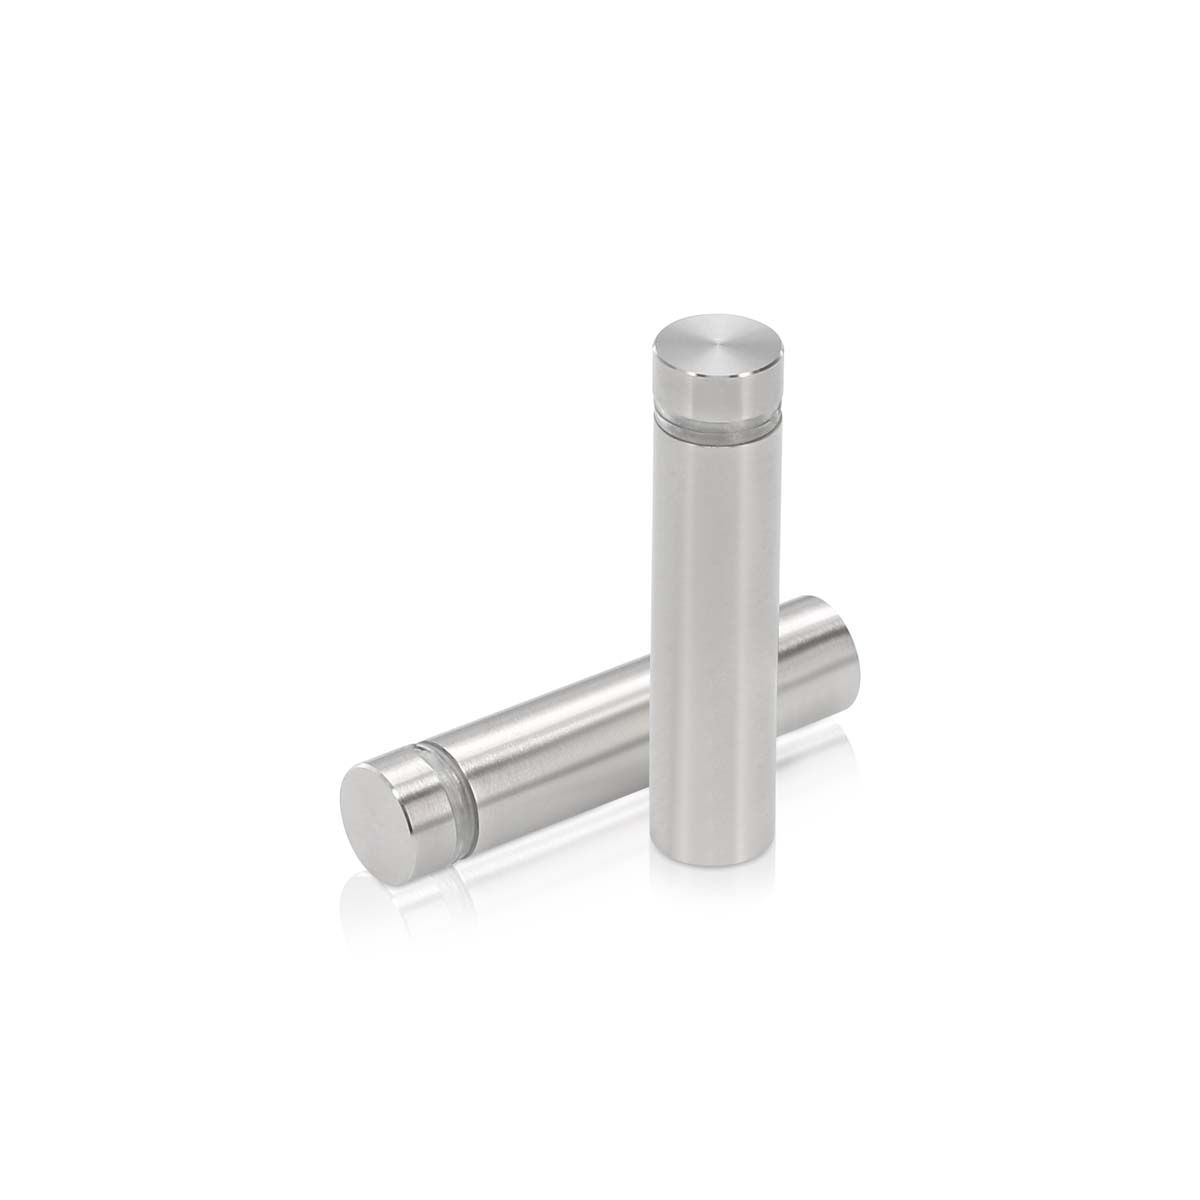 1/2'' Diameter X 1-3/4'' Barrel Length, Stainless Steel Brushed Finish. Easy Fasten Standoff (For Inside Use Only) [Required Material Hole Size: 3/8'']